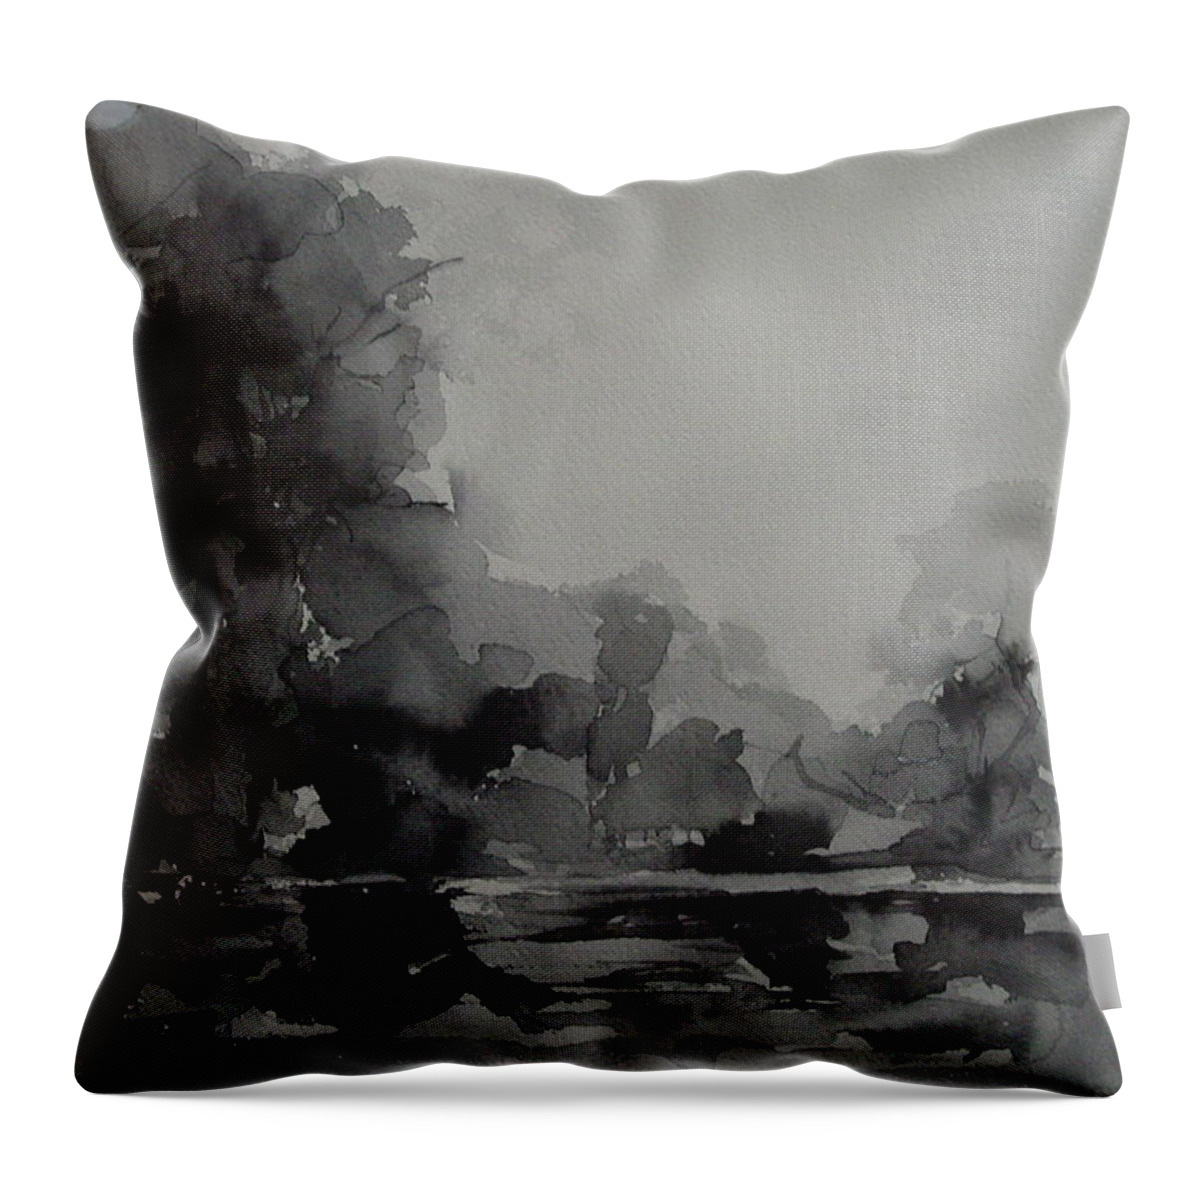 Value Throw Pillow featuring the painting Landscape Value Study by Robin Miller-Bookhout